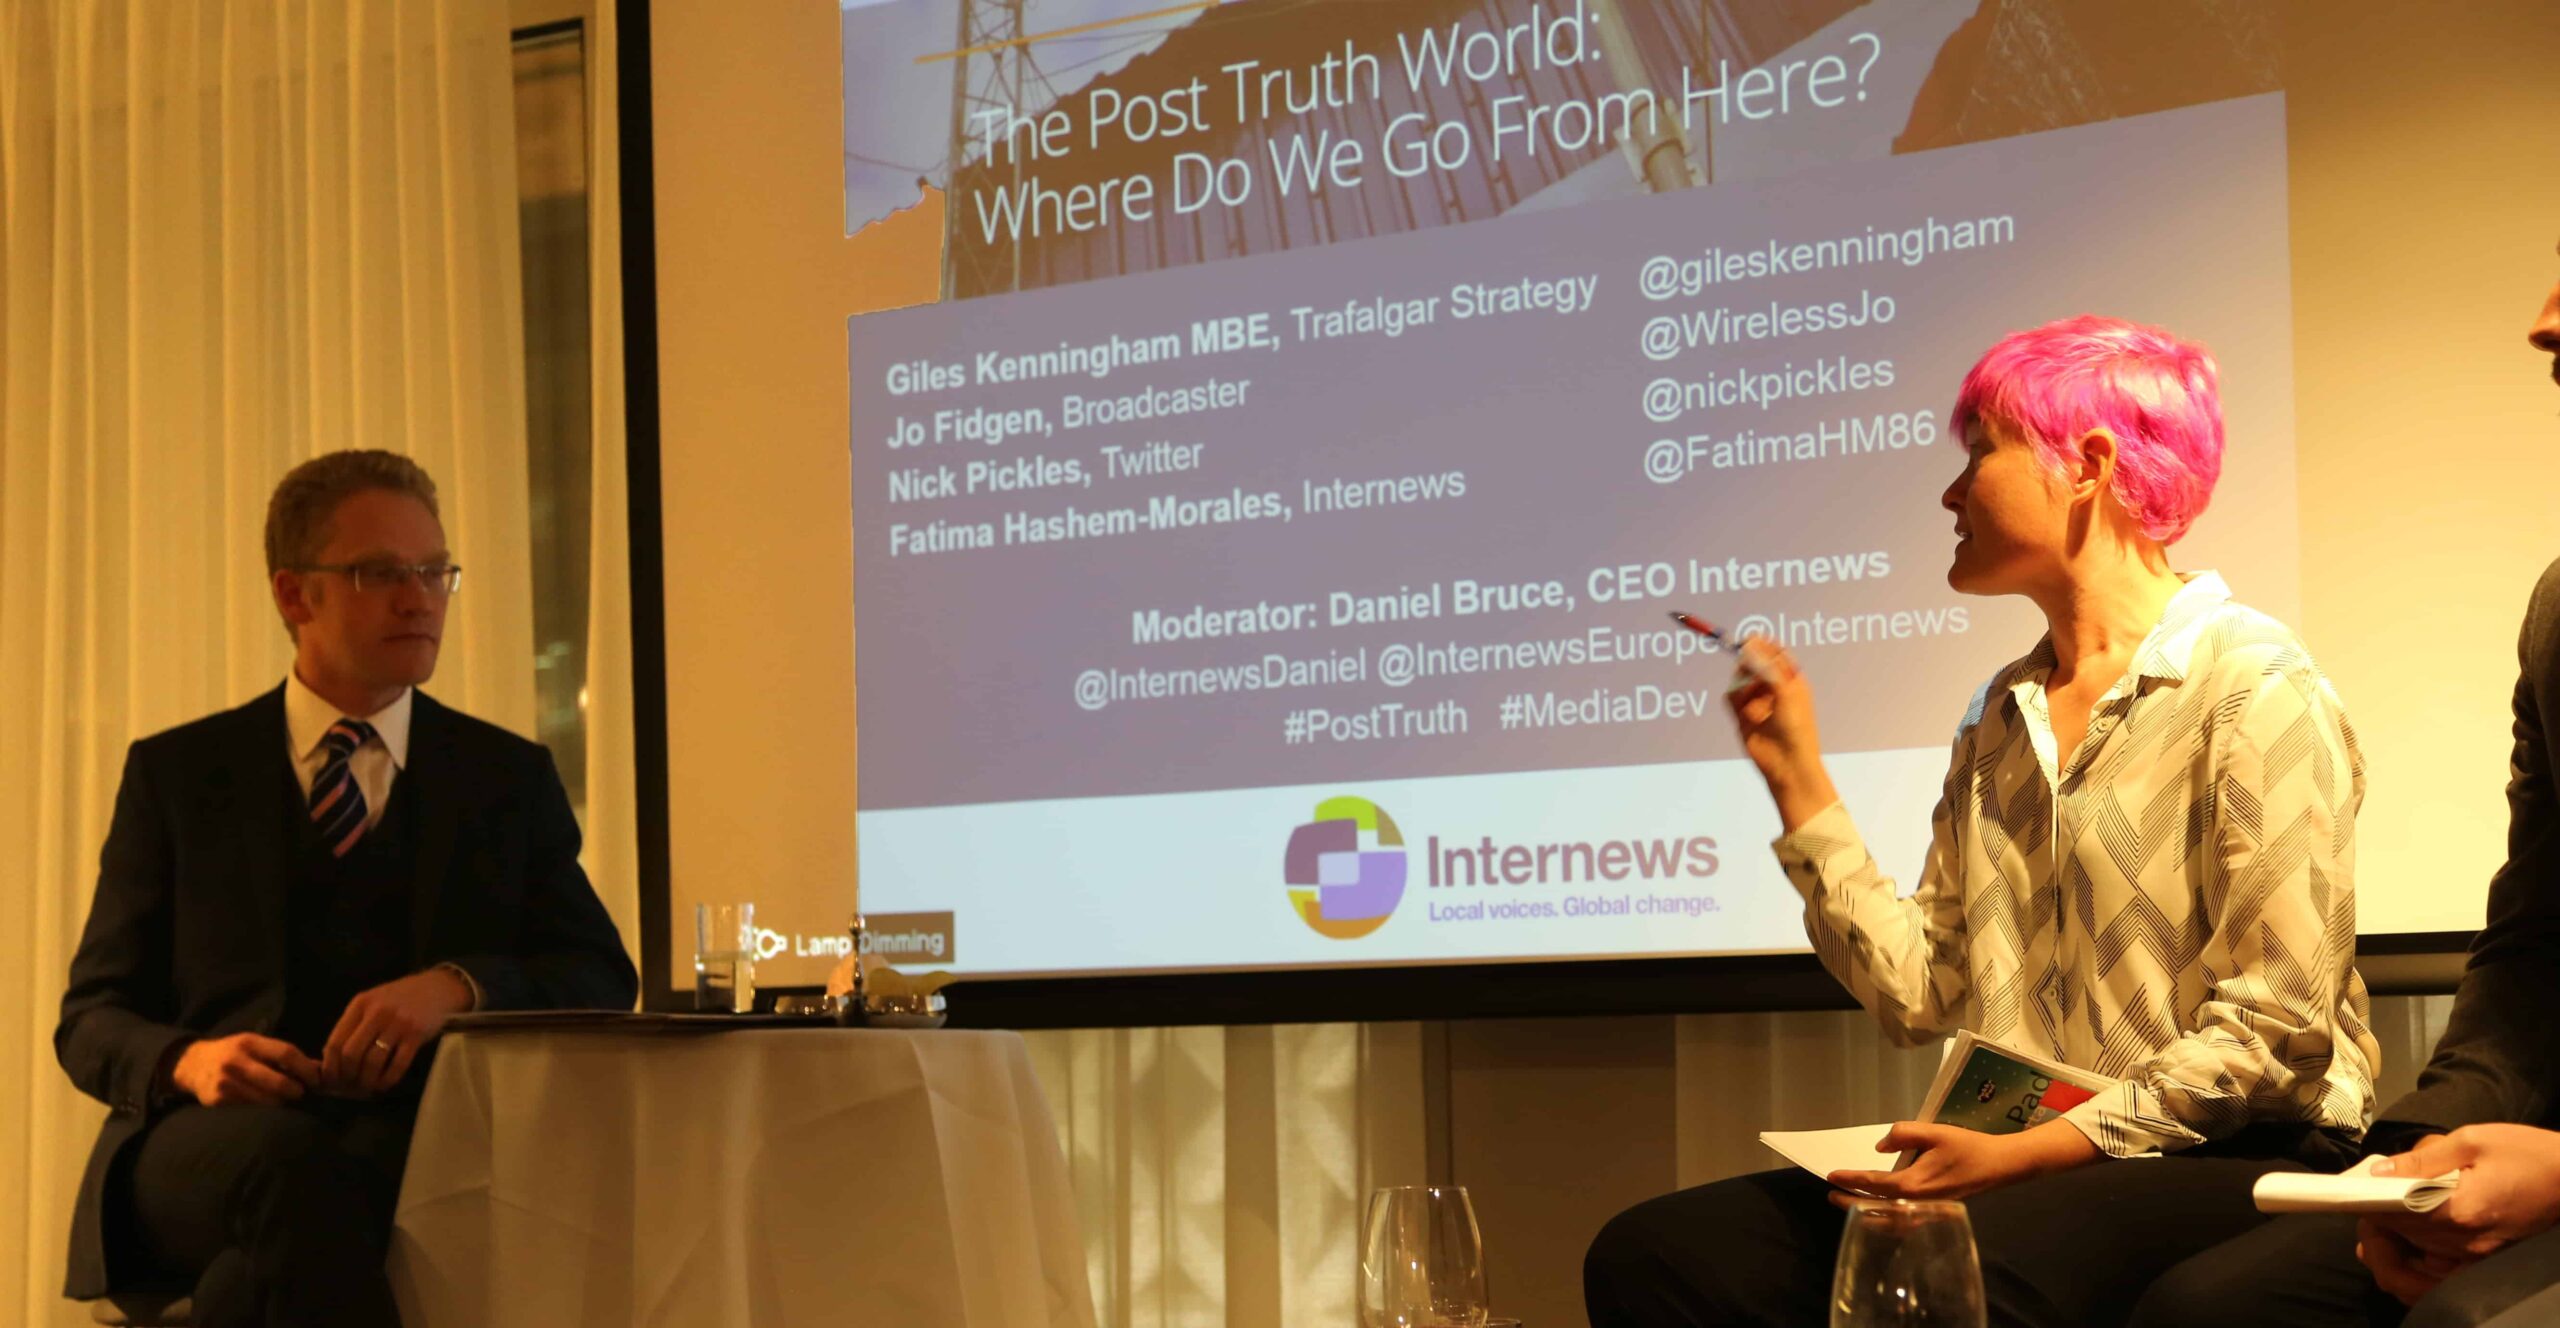 The Post Truth World: Where do we go from here?